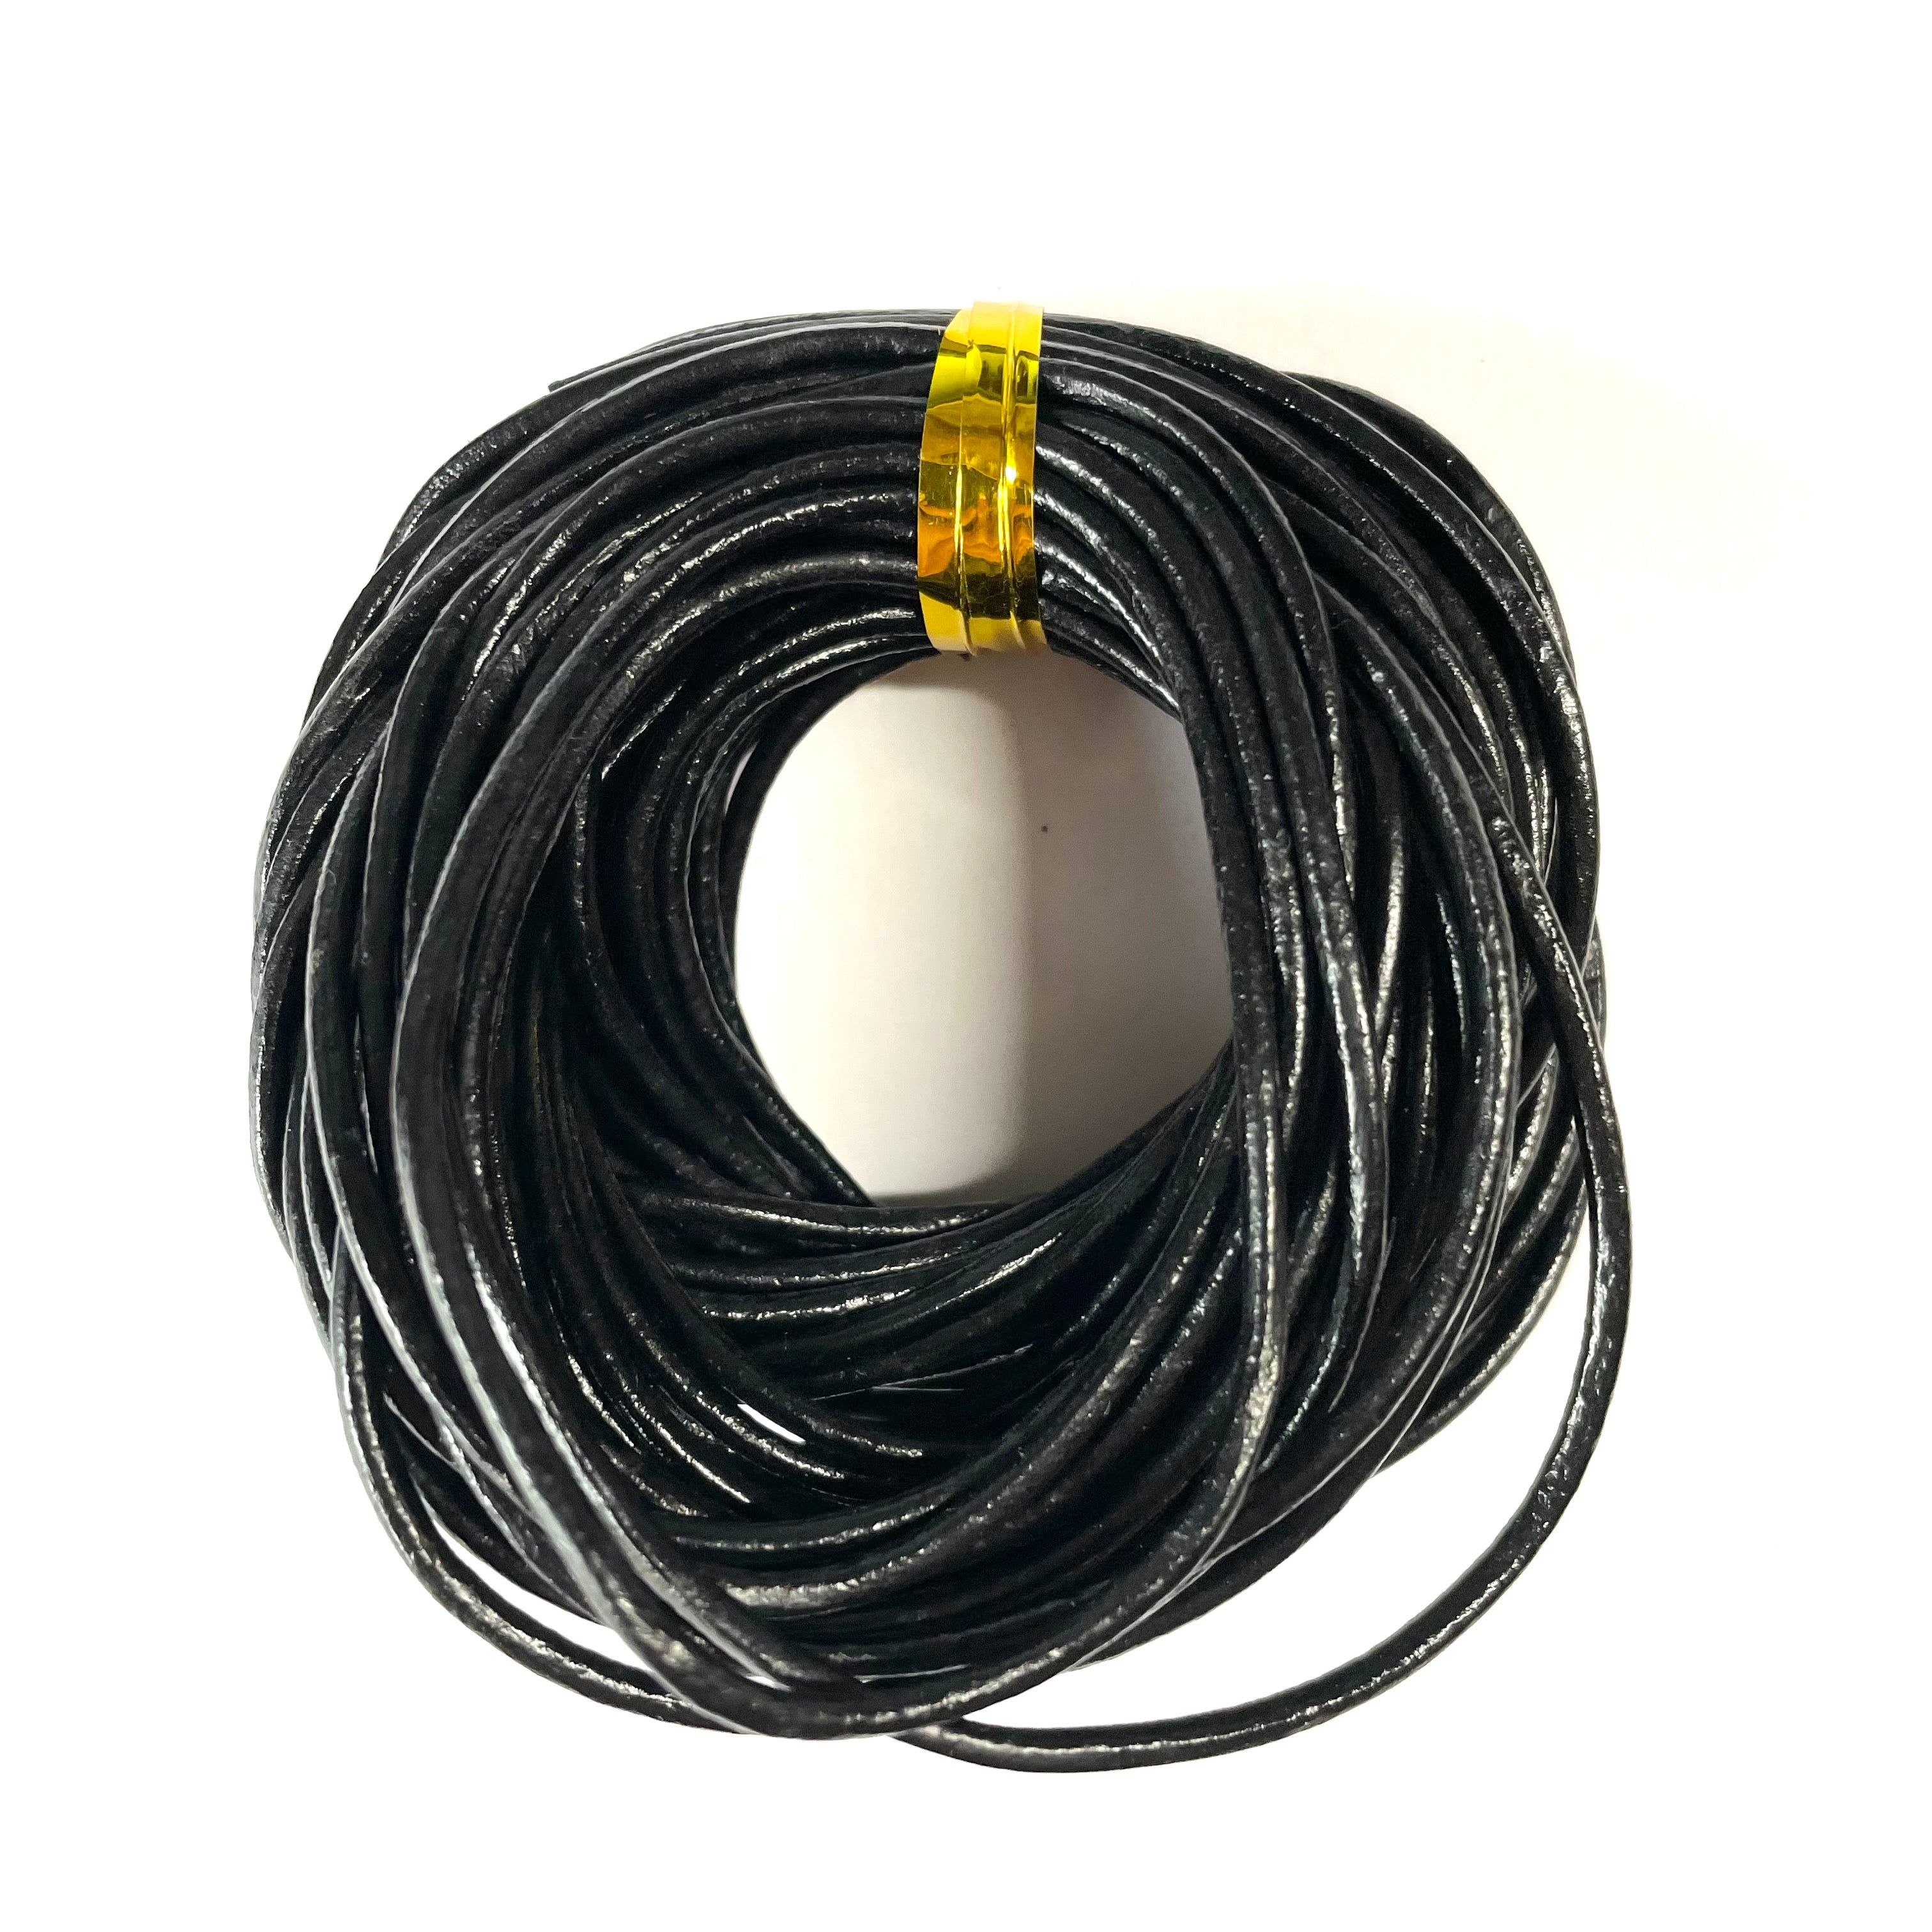 Natural Genuine Leather Cord per 10mtrs - Black 2mm